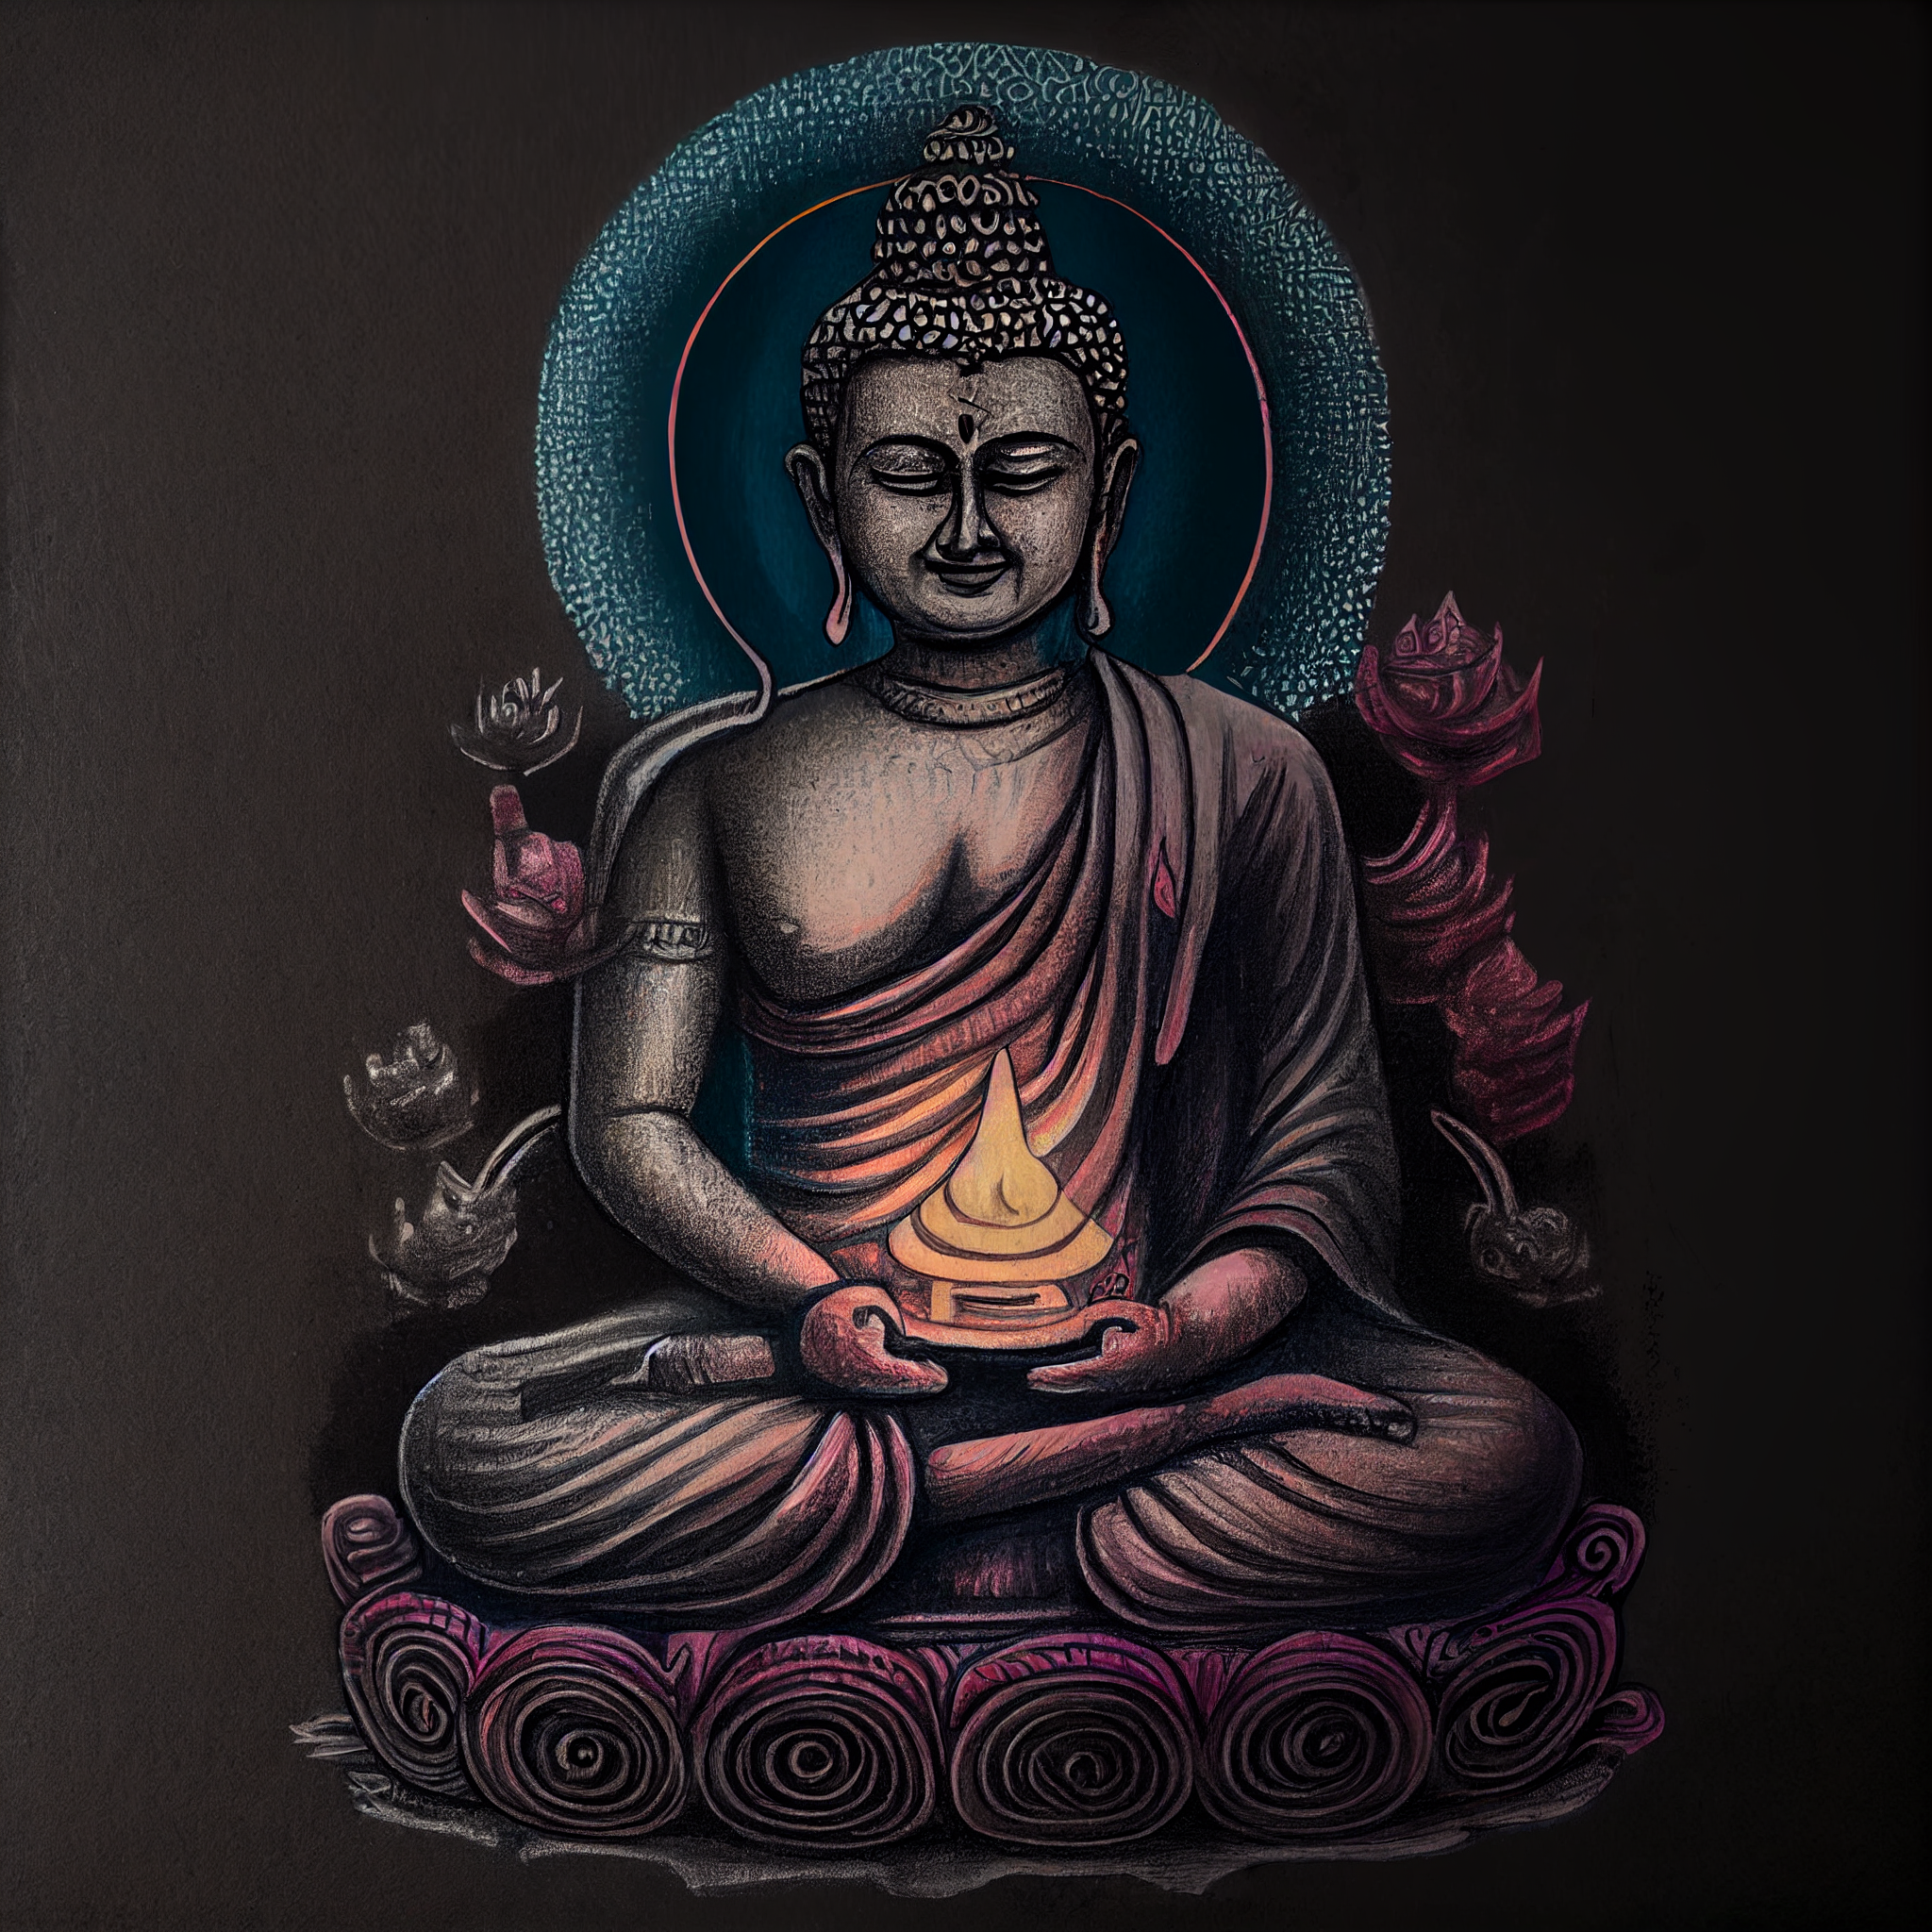 Divine Serenity: A Colored Pencil Sketch Print of Lord Buddha with Om on Grey Background